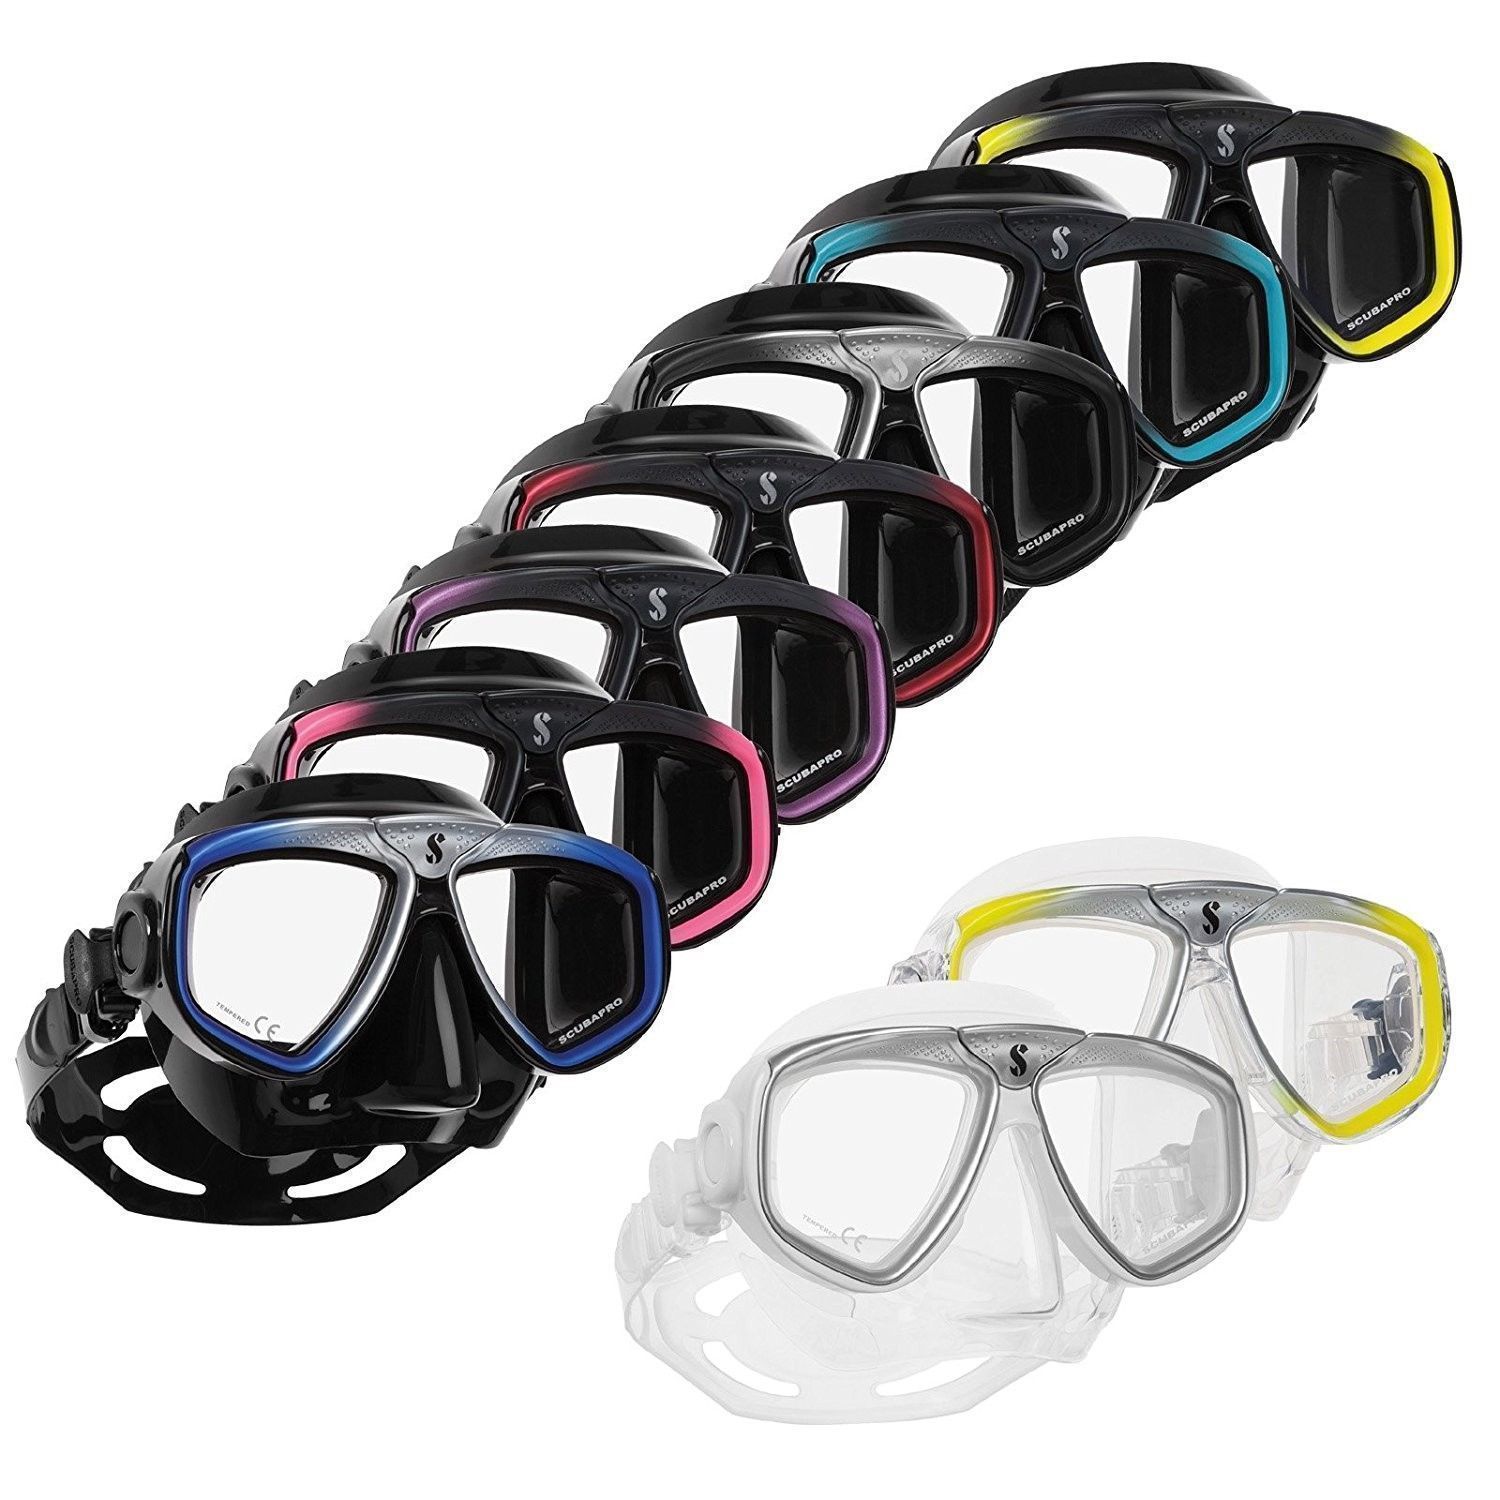 Scubapro Zoom Mask For Sale Online in Canada